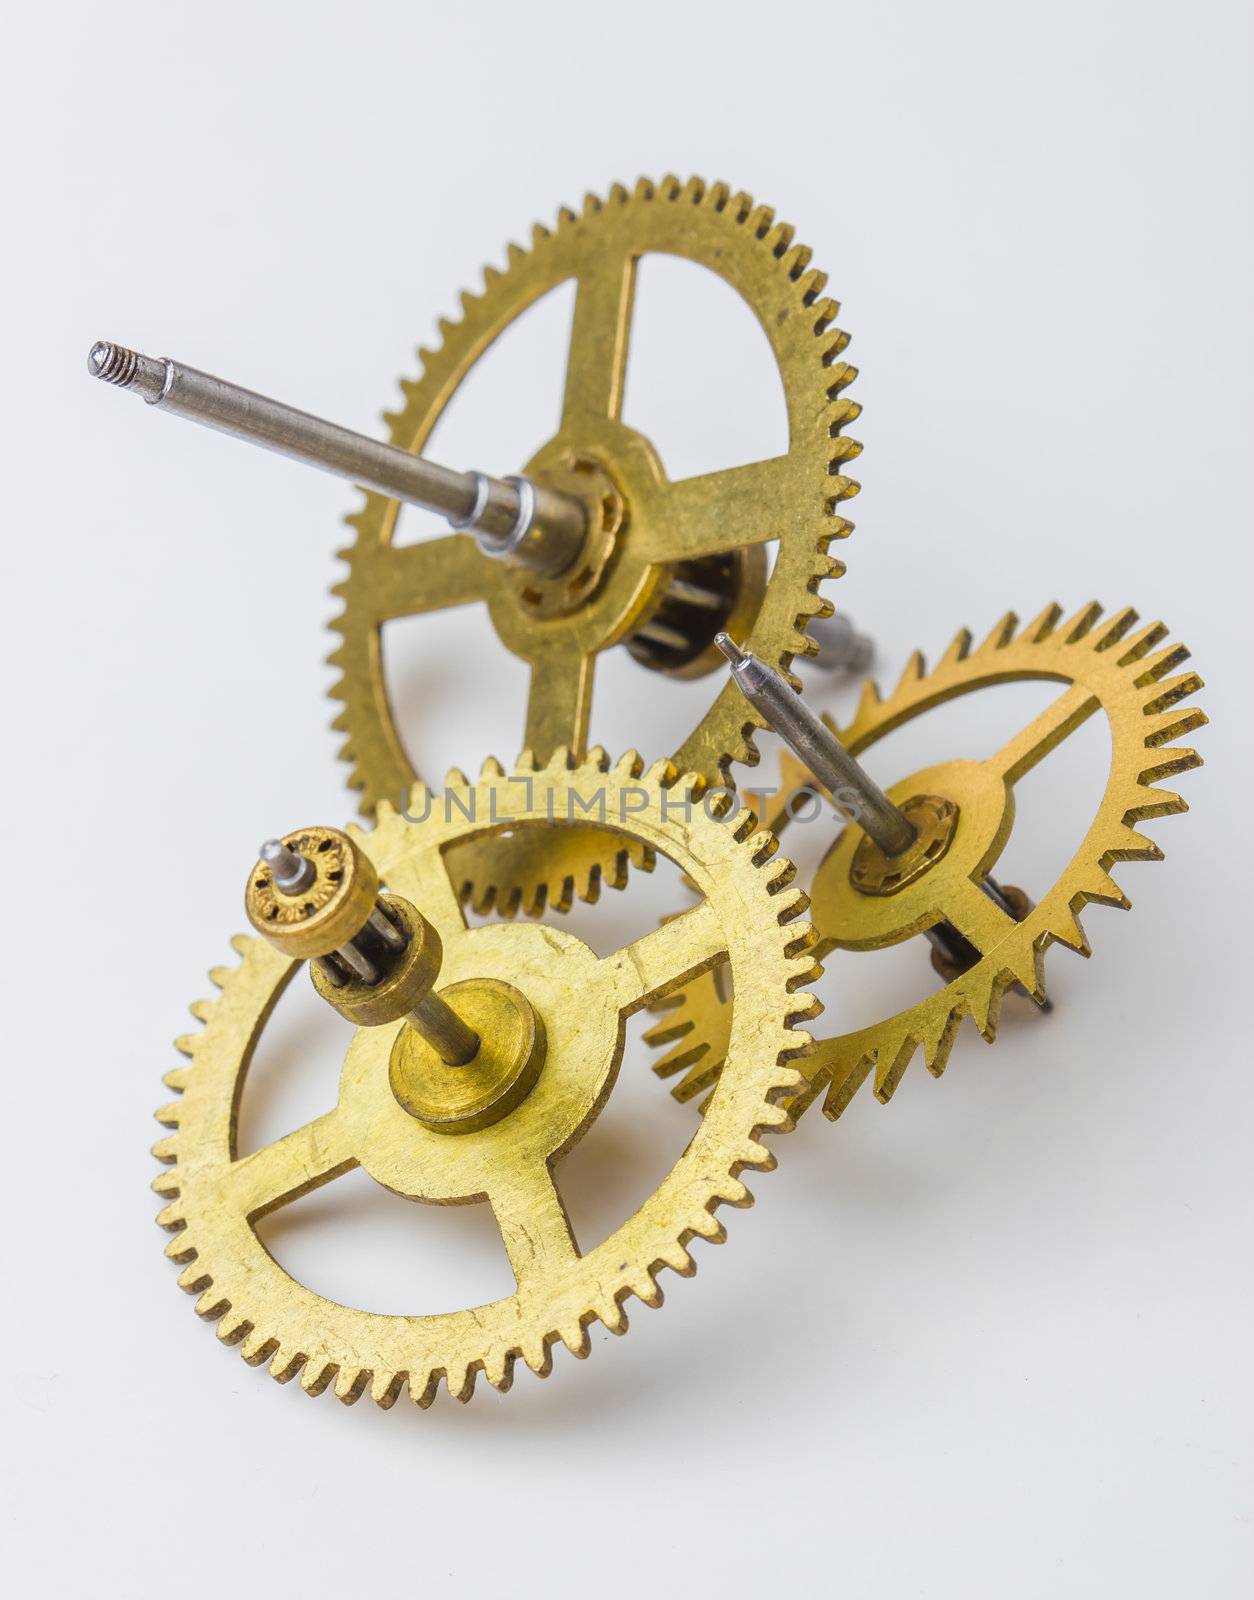 gears of the old clock on a white background